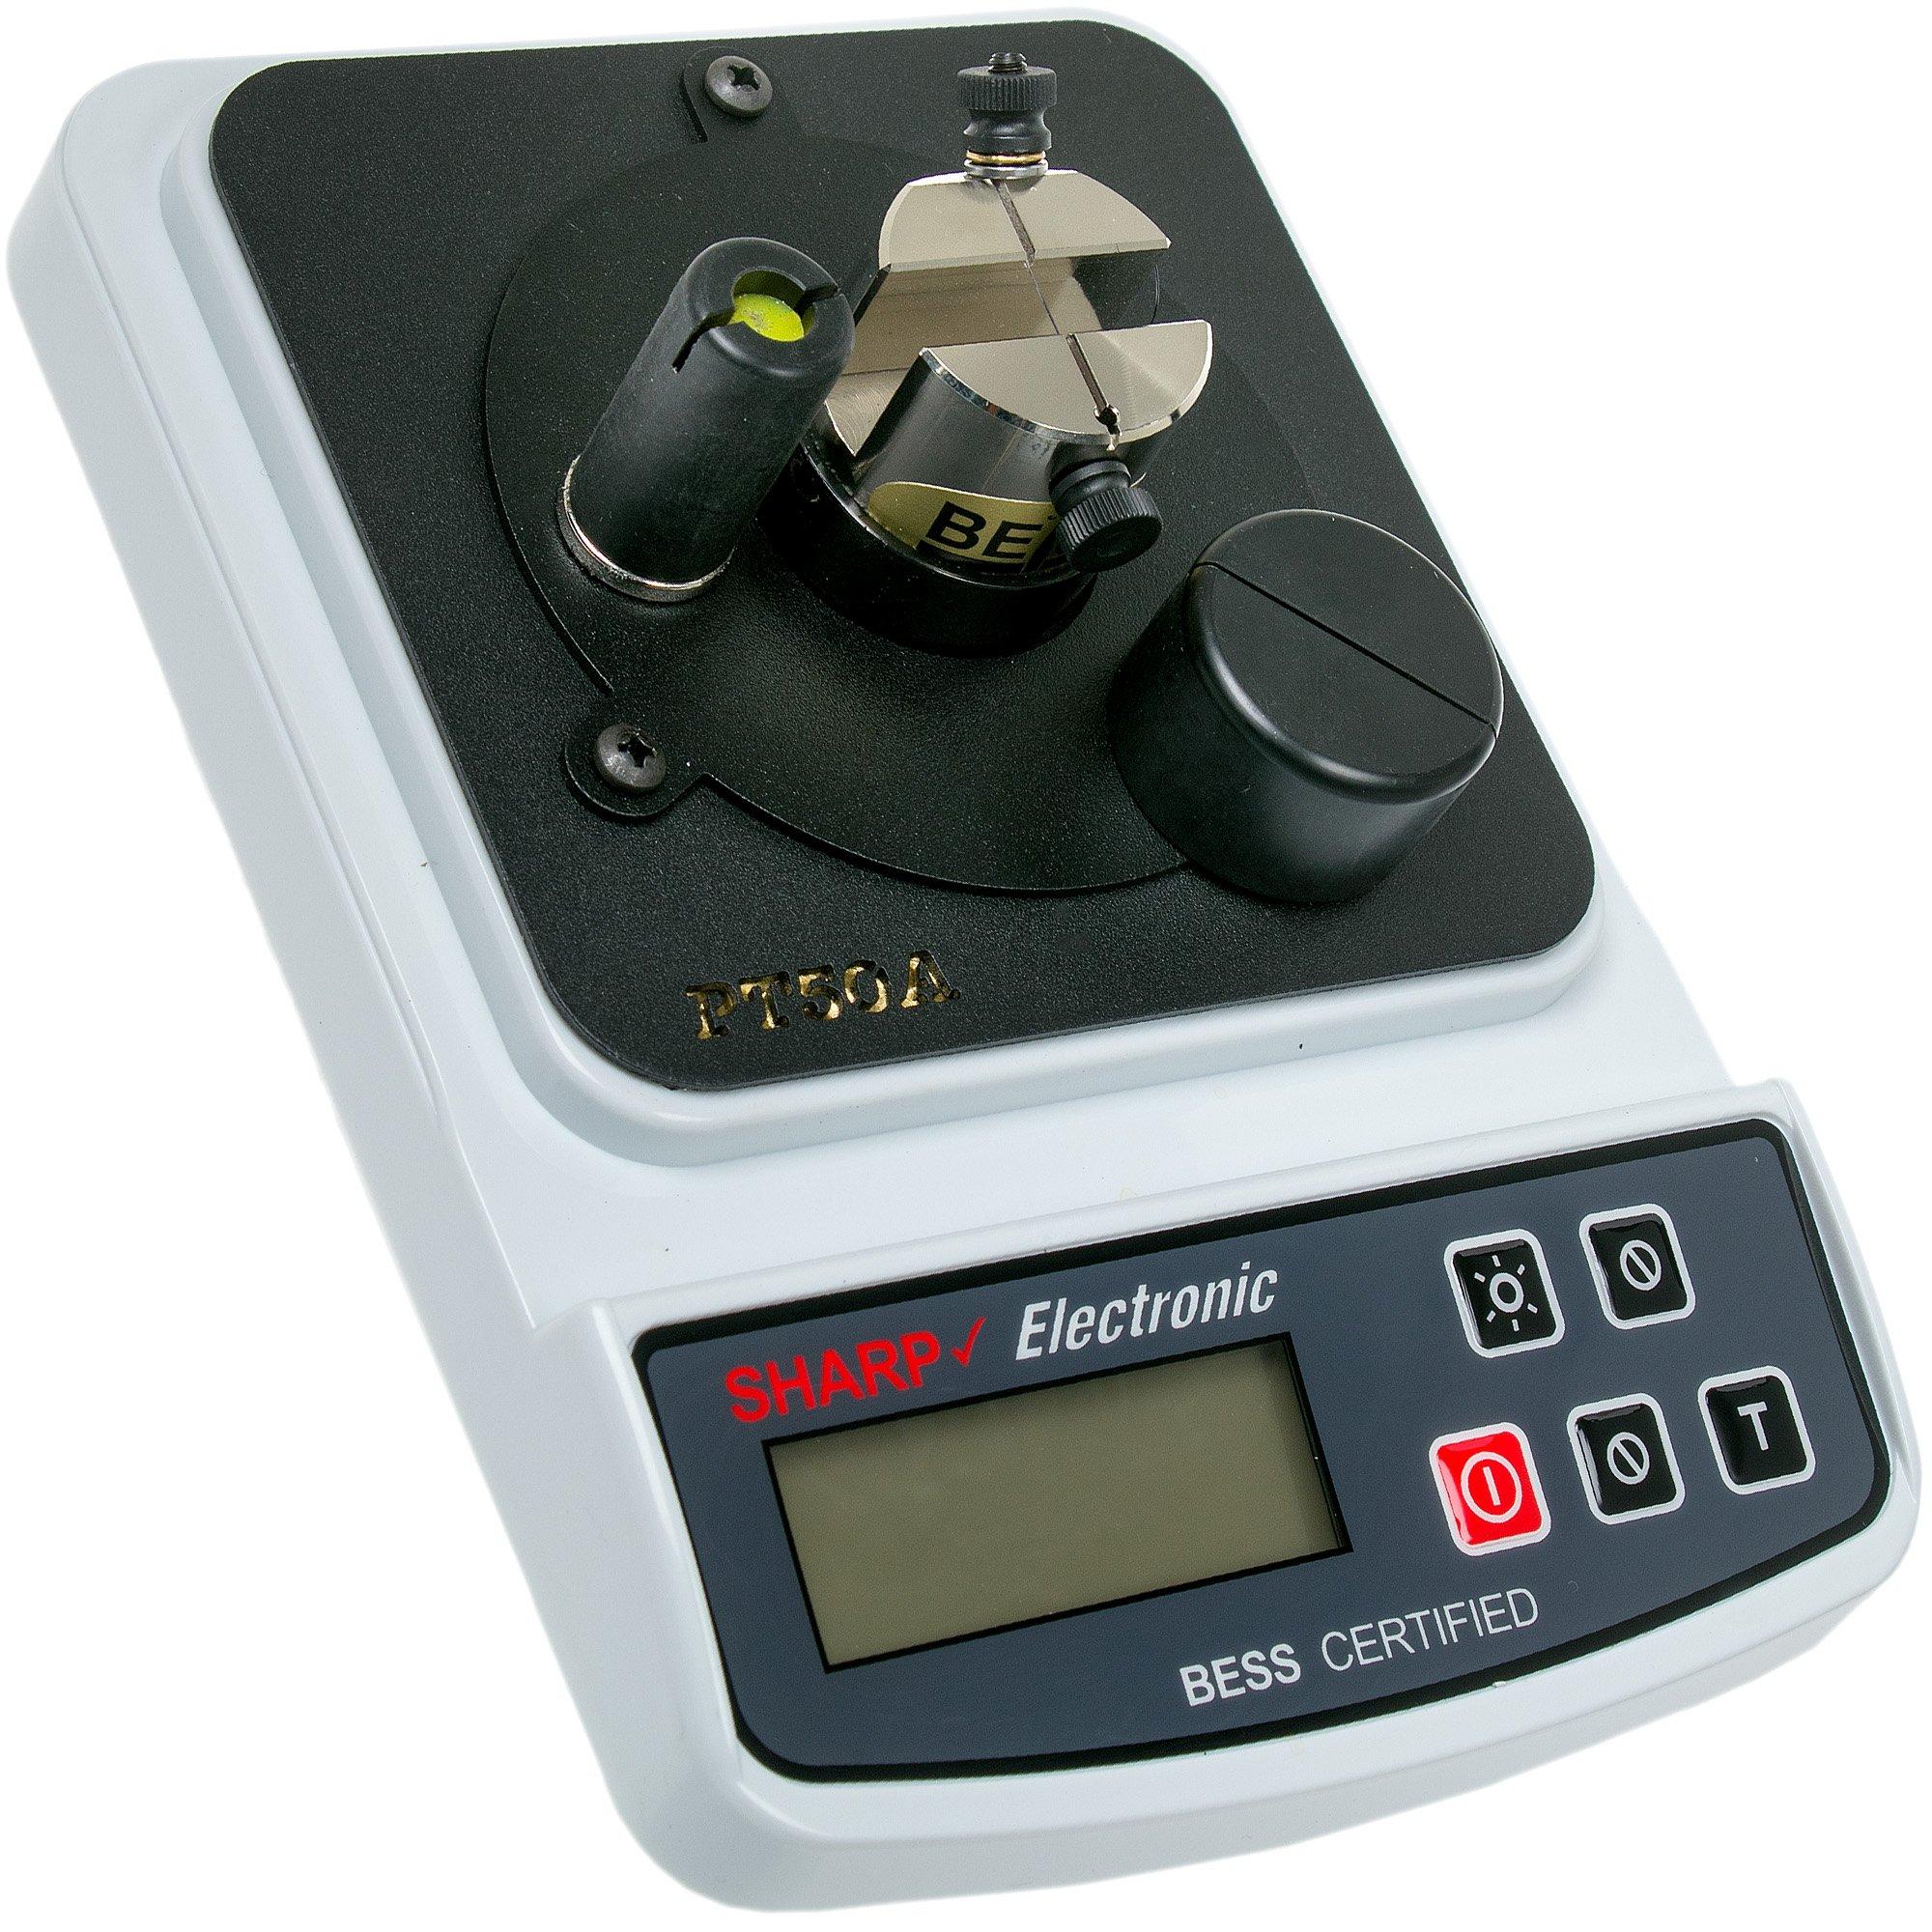 Edge-On-Up PT50A sharpness tester  Advantageously shopping at